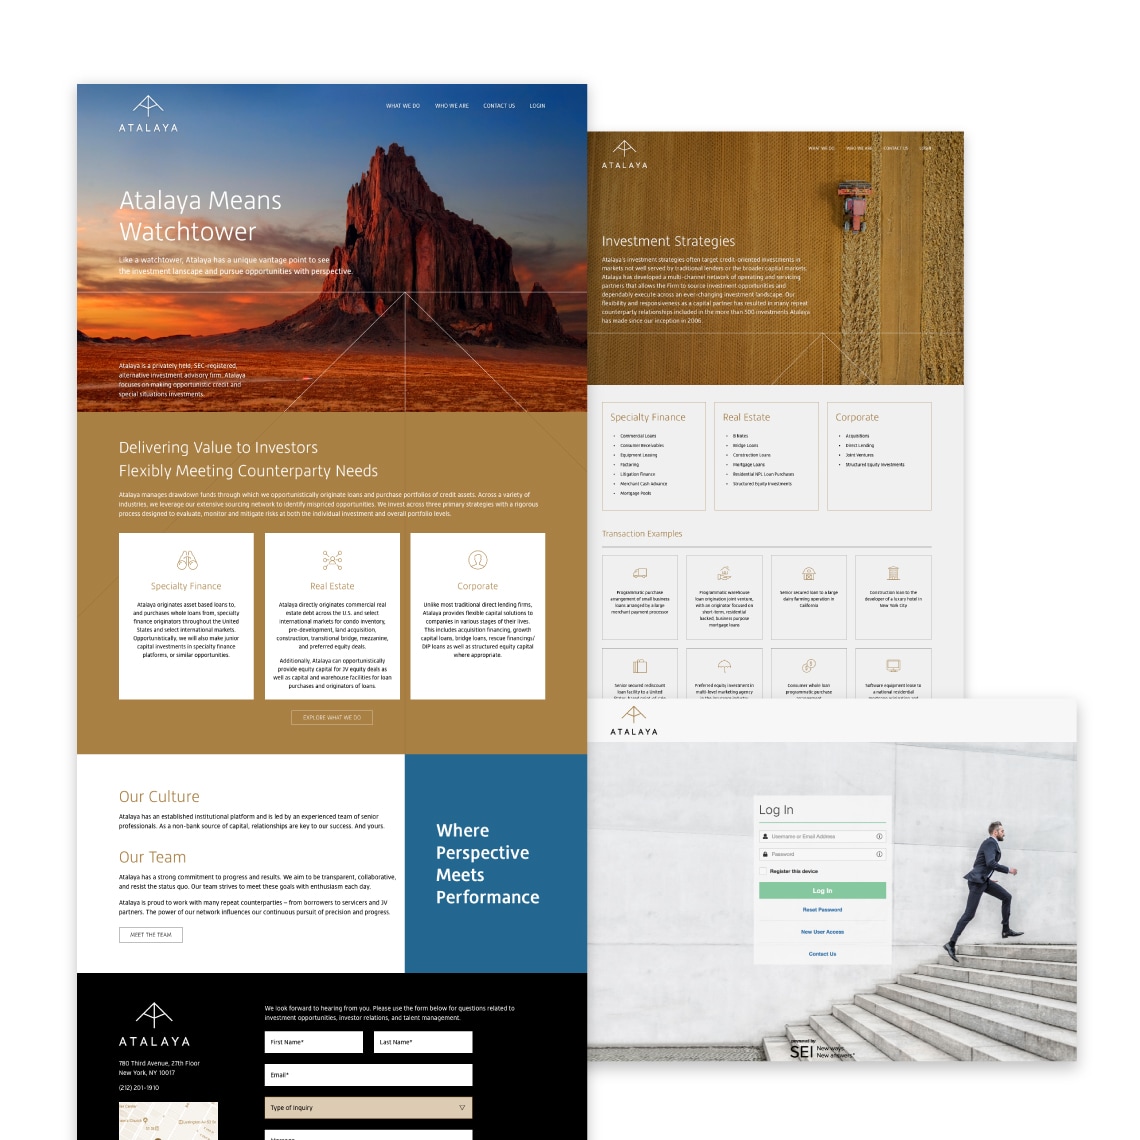 Examples of the web pages designed and developed for Atalaya